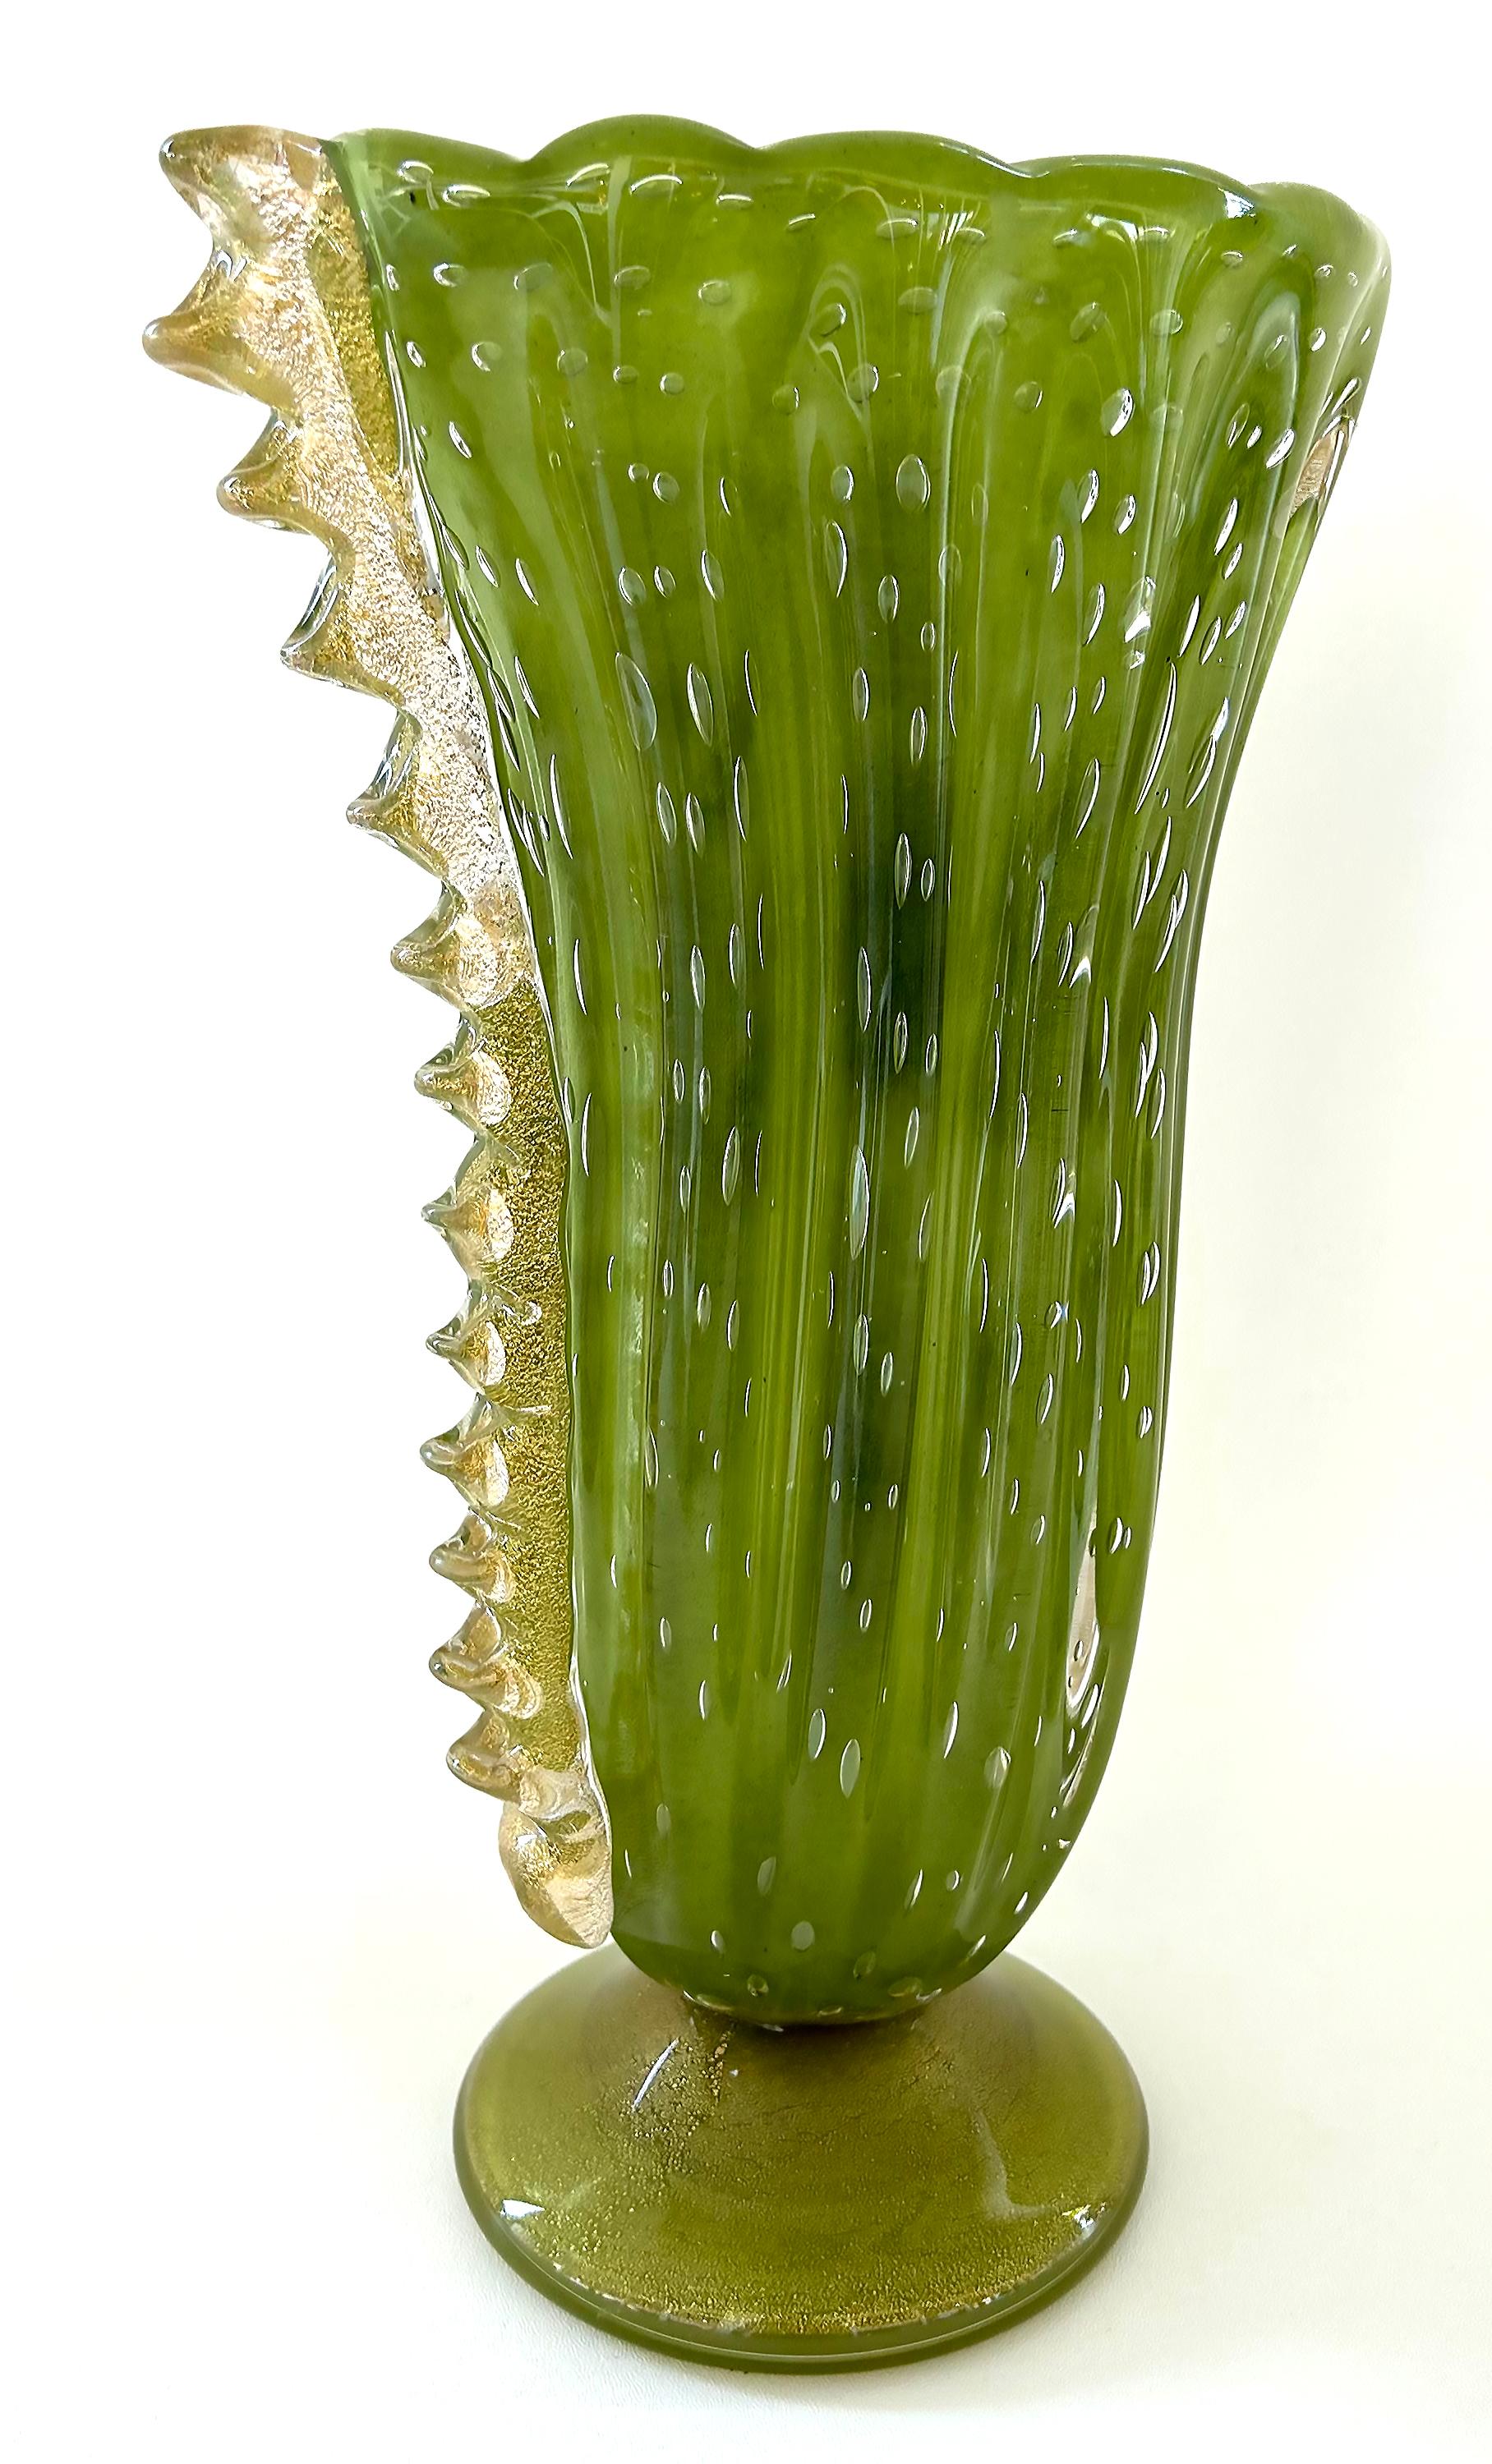 Barovier&Toso Murano Glass Bullicante Green Vase, Gold Infused Fins, Italy 

Offered for sale is a large green 1930s Art Deco Barovier&Toso Murano glass with bullicante, controlled elongated bubbles, and gold inclusions. The gold inclusions run